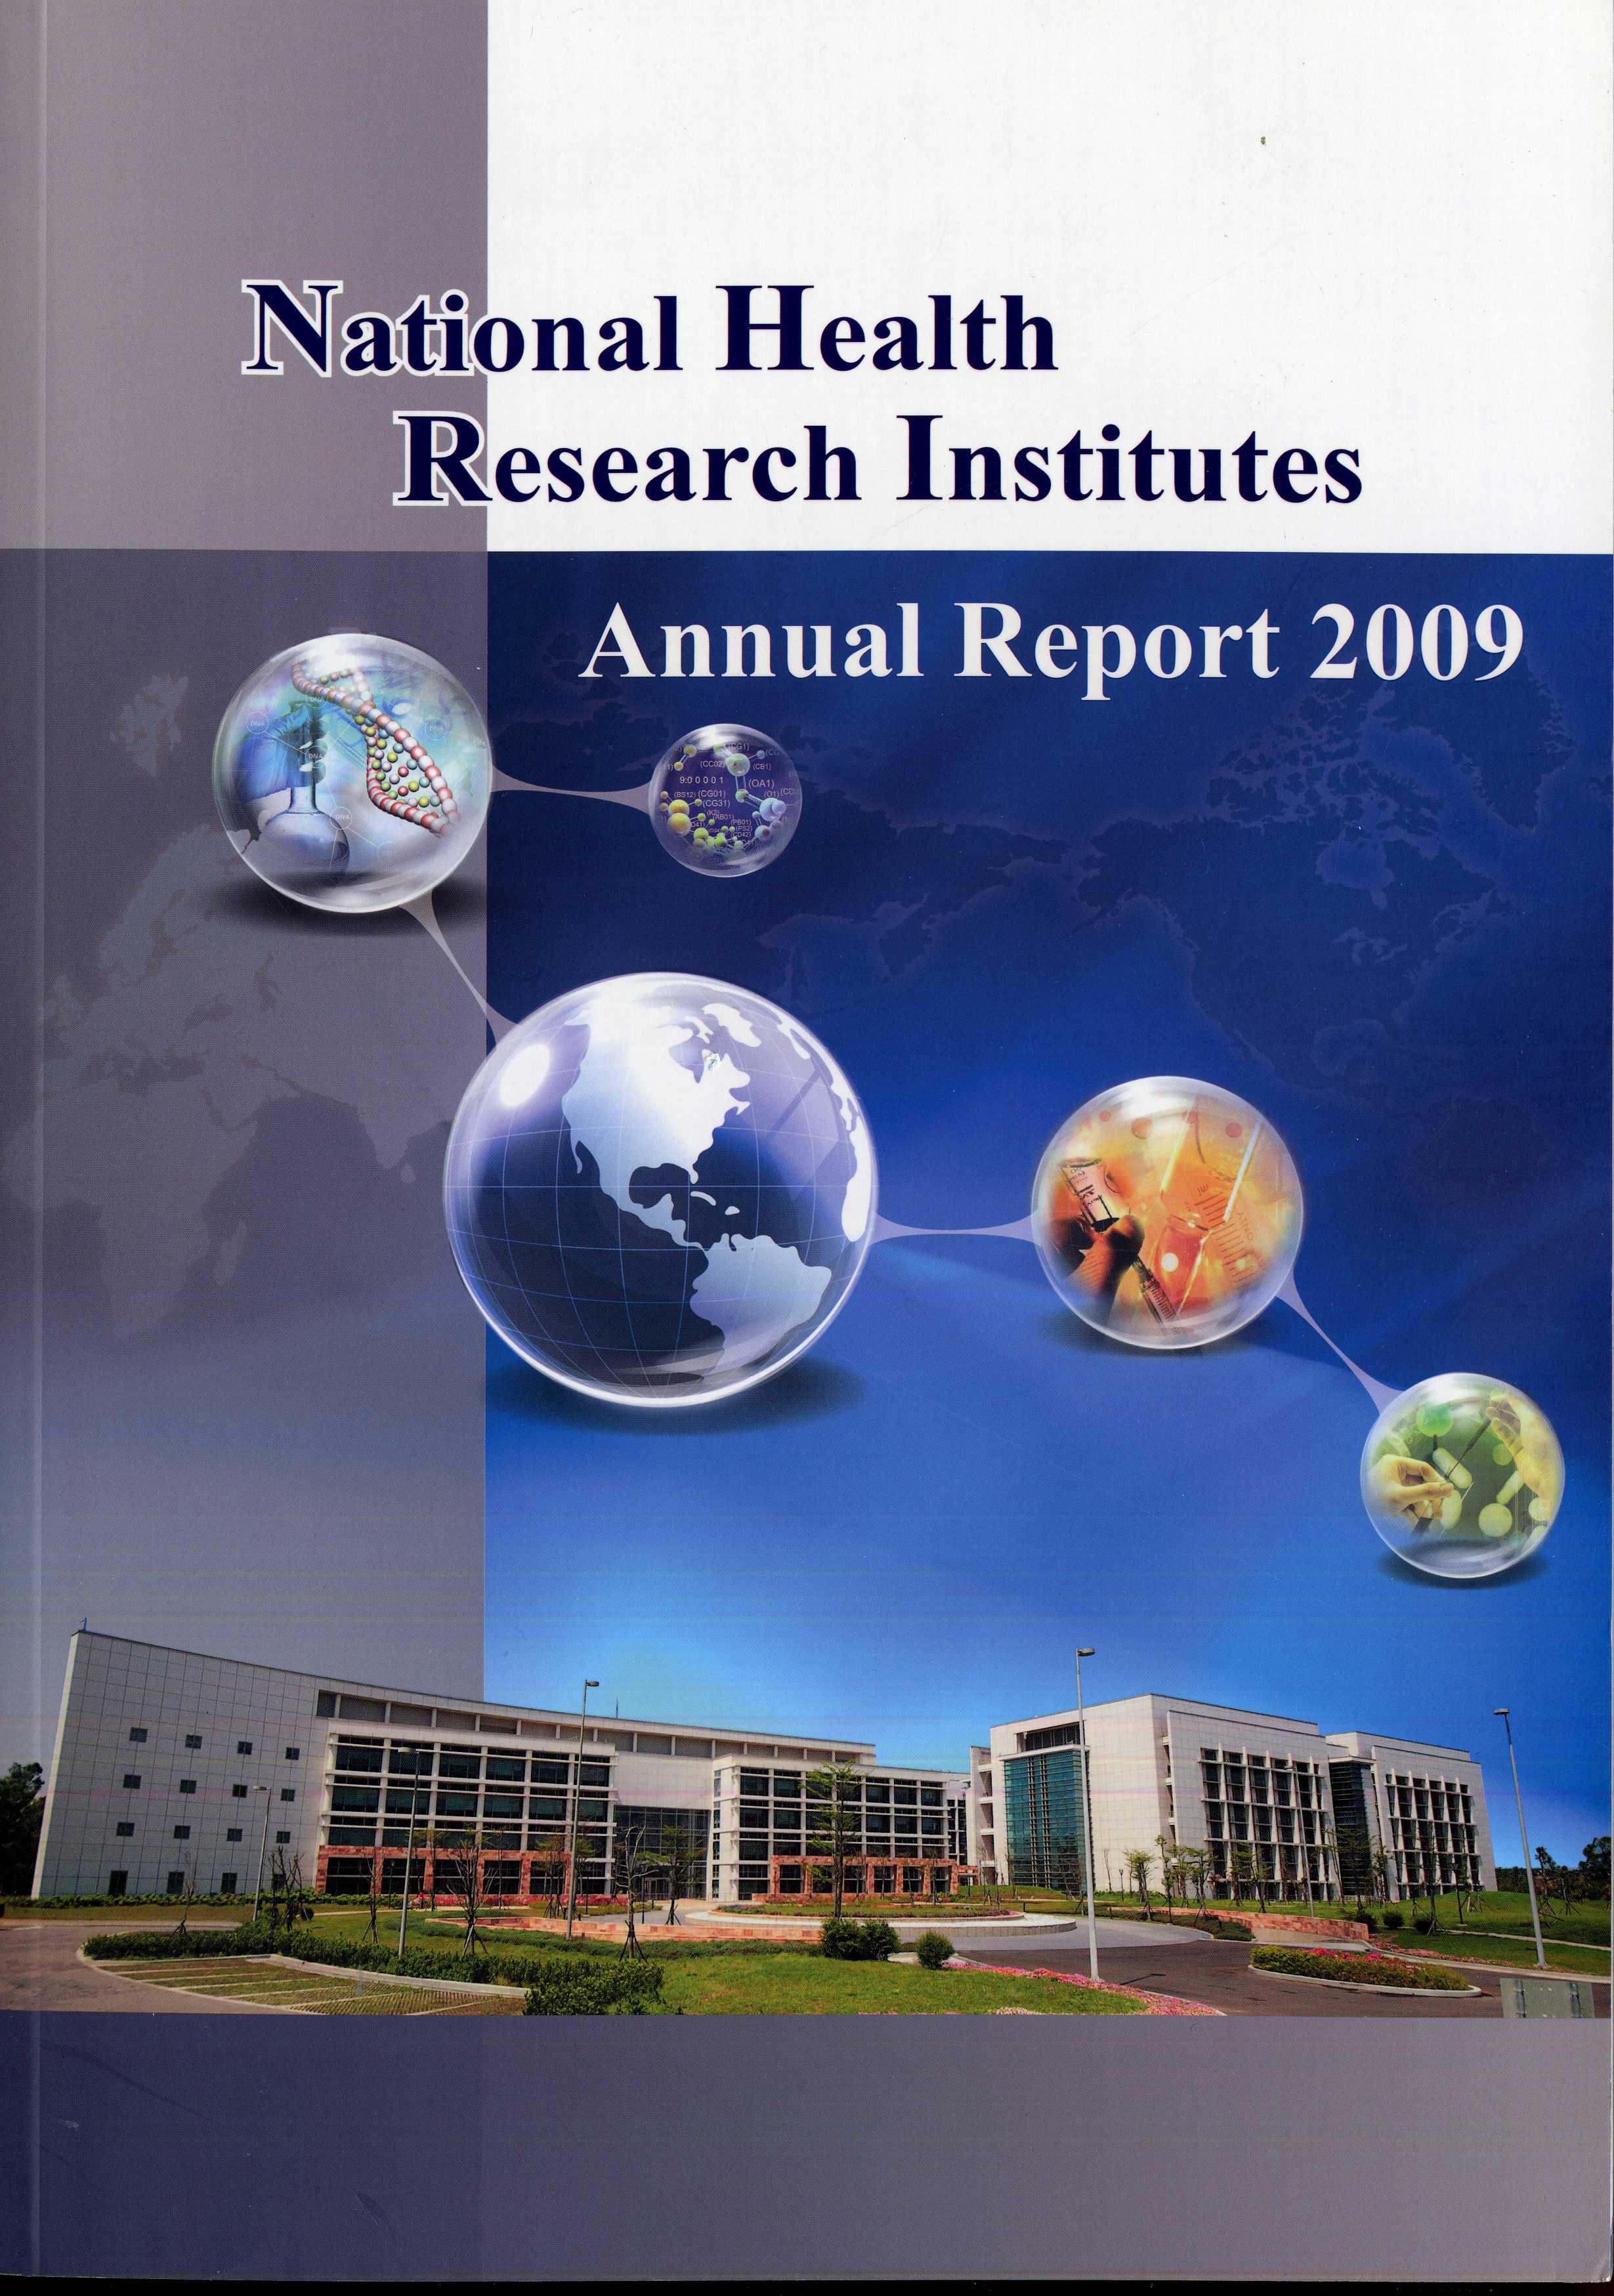 National Health Research Institutes Annual Report 2009